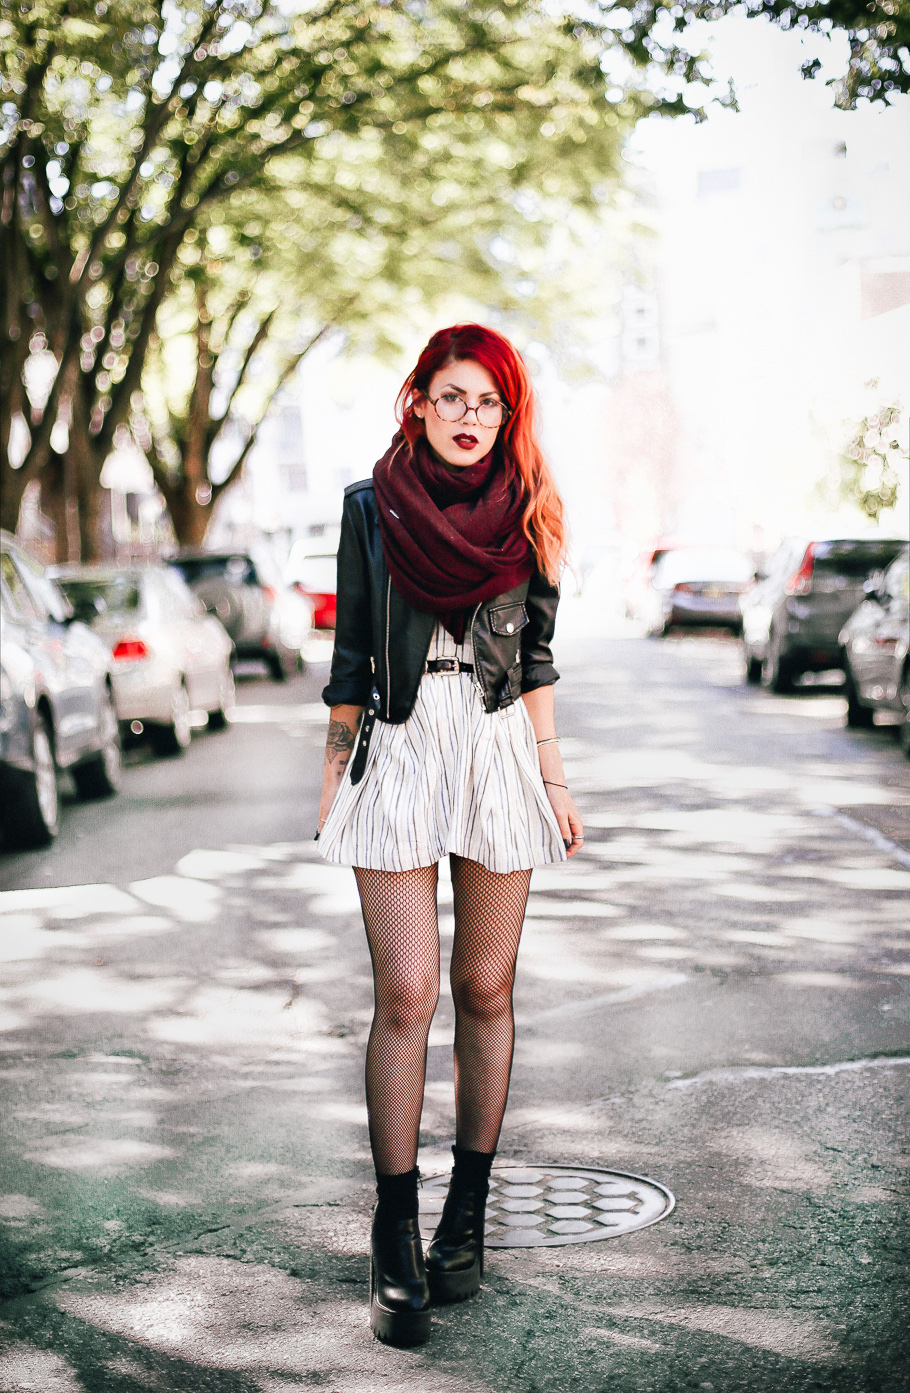 Le Happy wearing Joa striped skater dress and White and Warren scarf